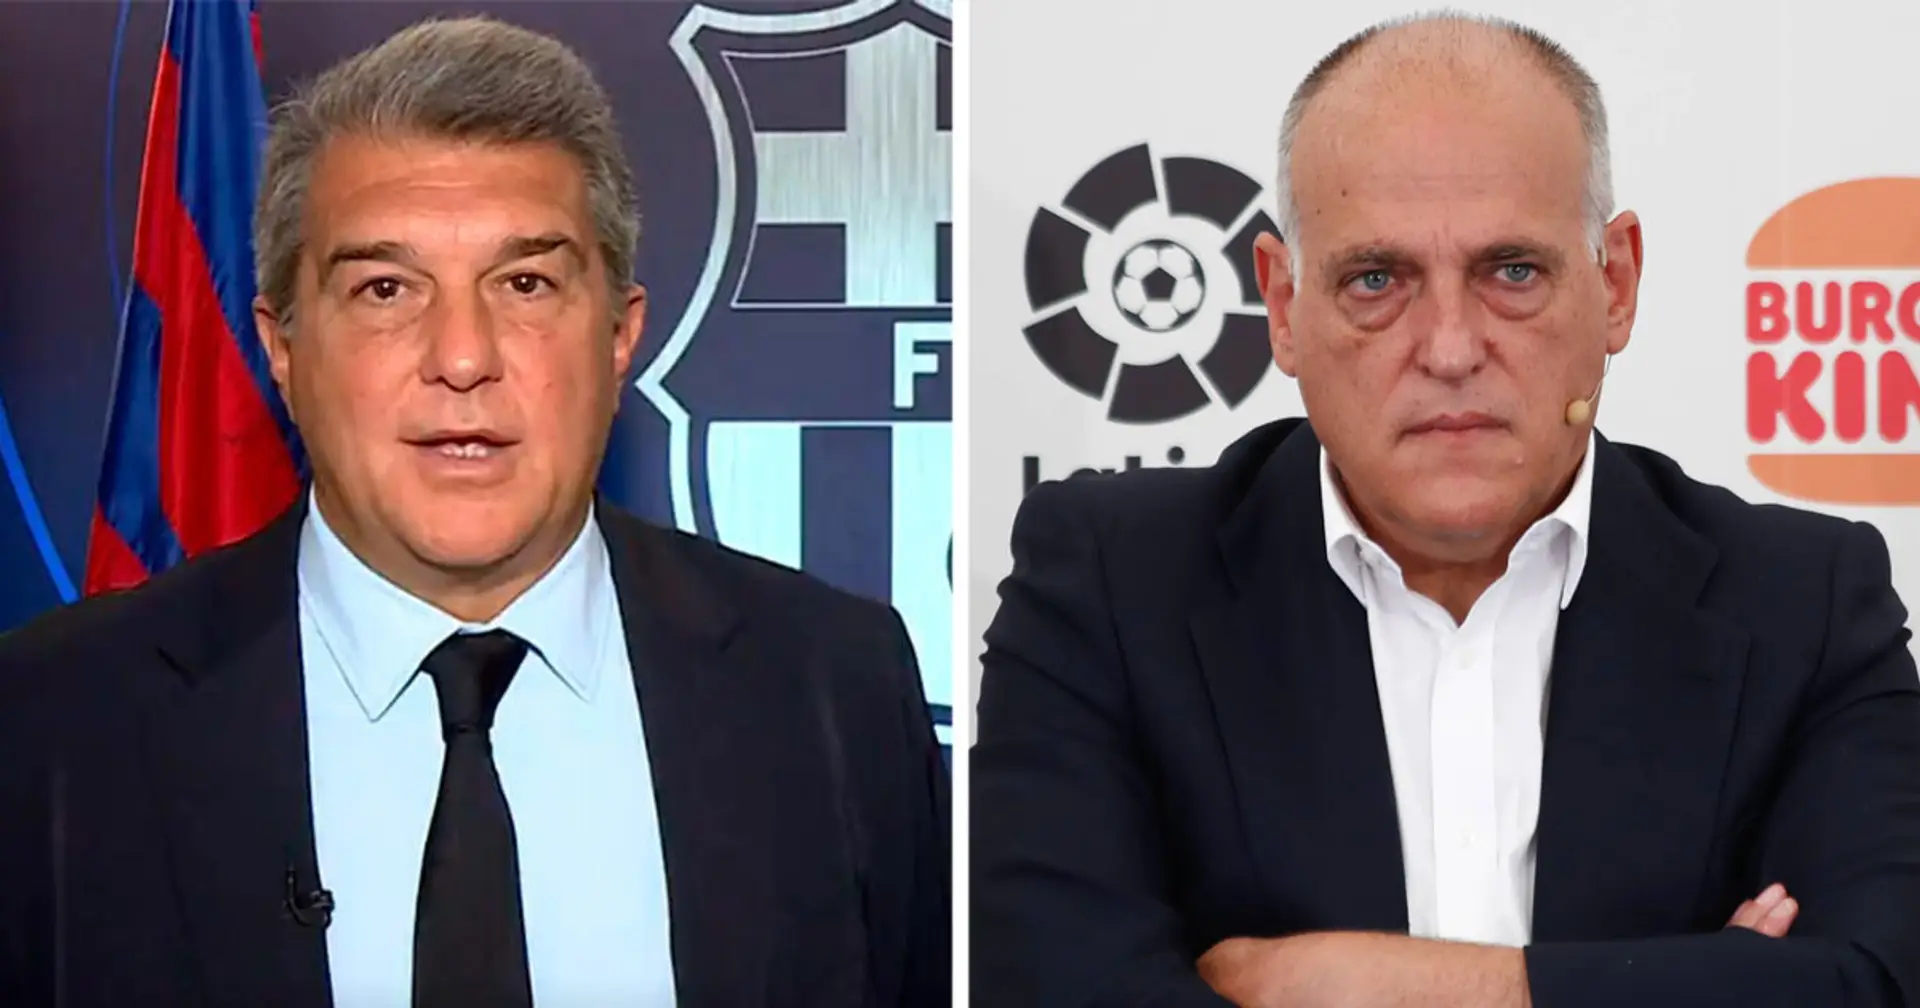 Laporta: 'Whoever attacks Barca will have to answer in front of the judges'